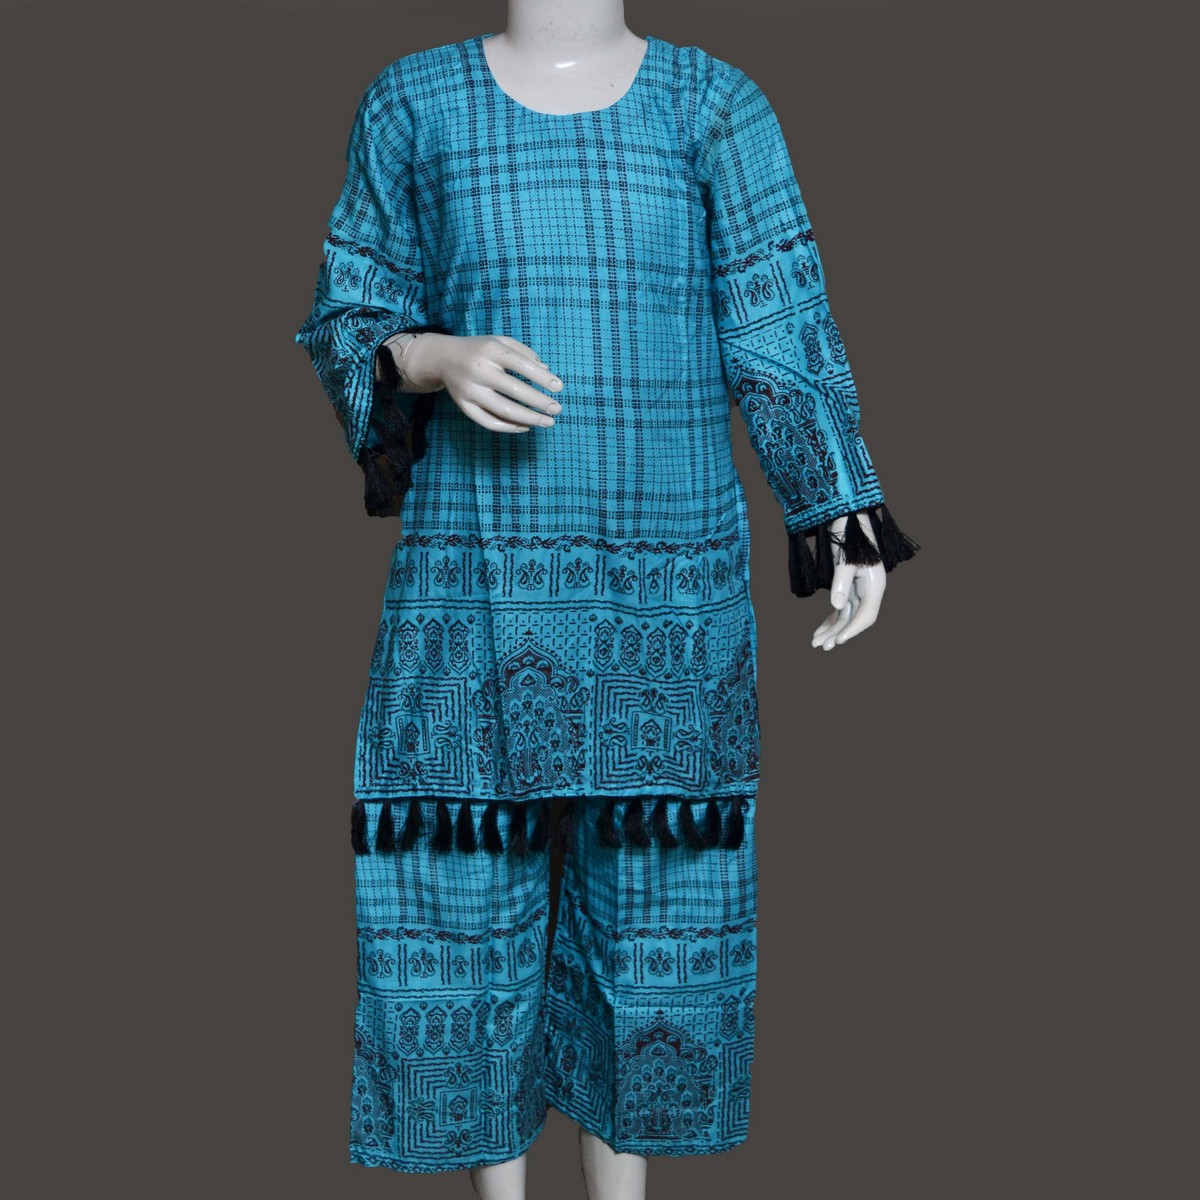 Neatly Printed Stitched 2 Pc Dress For Girls